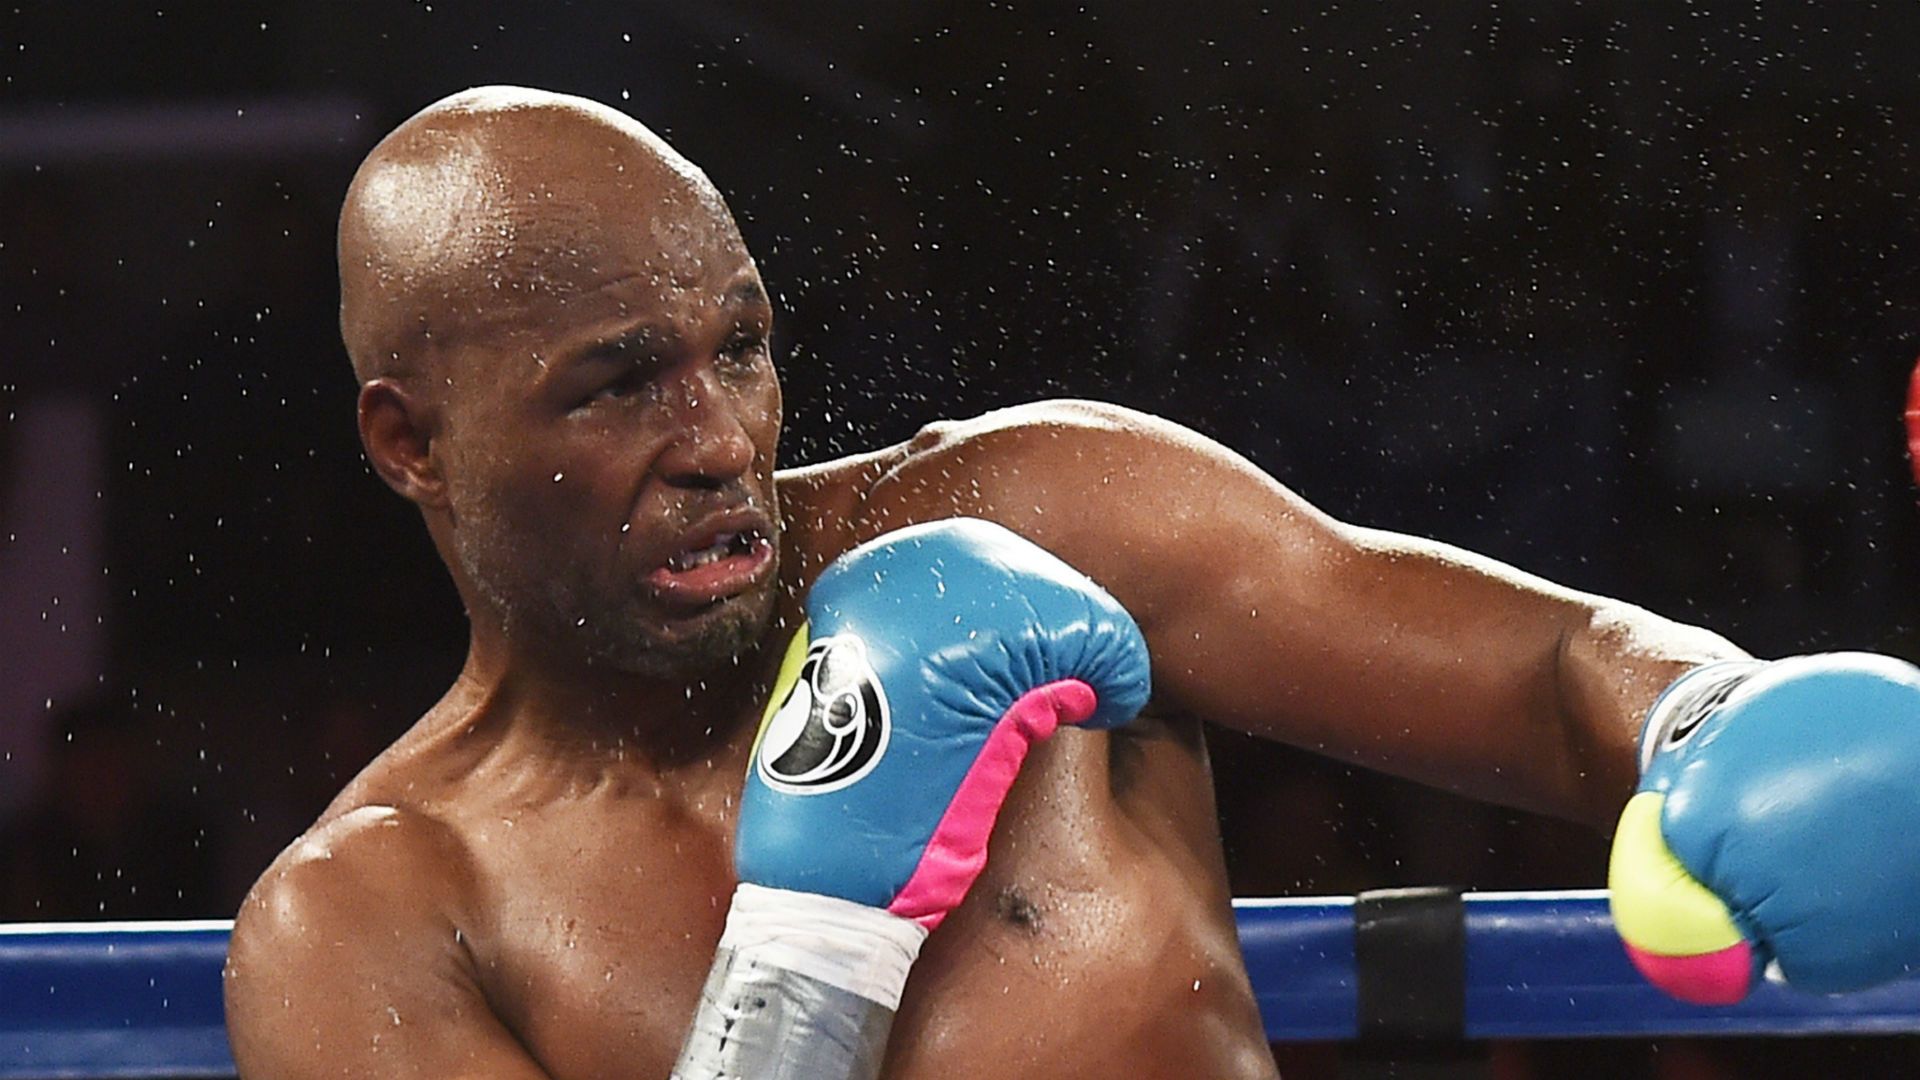 Bernard Hopkins knocked out of the ring in final bout